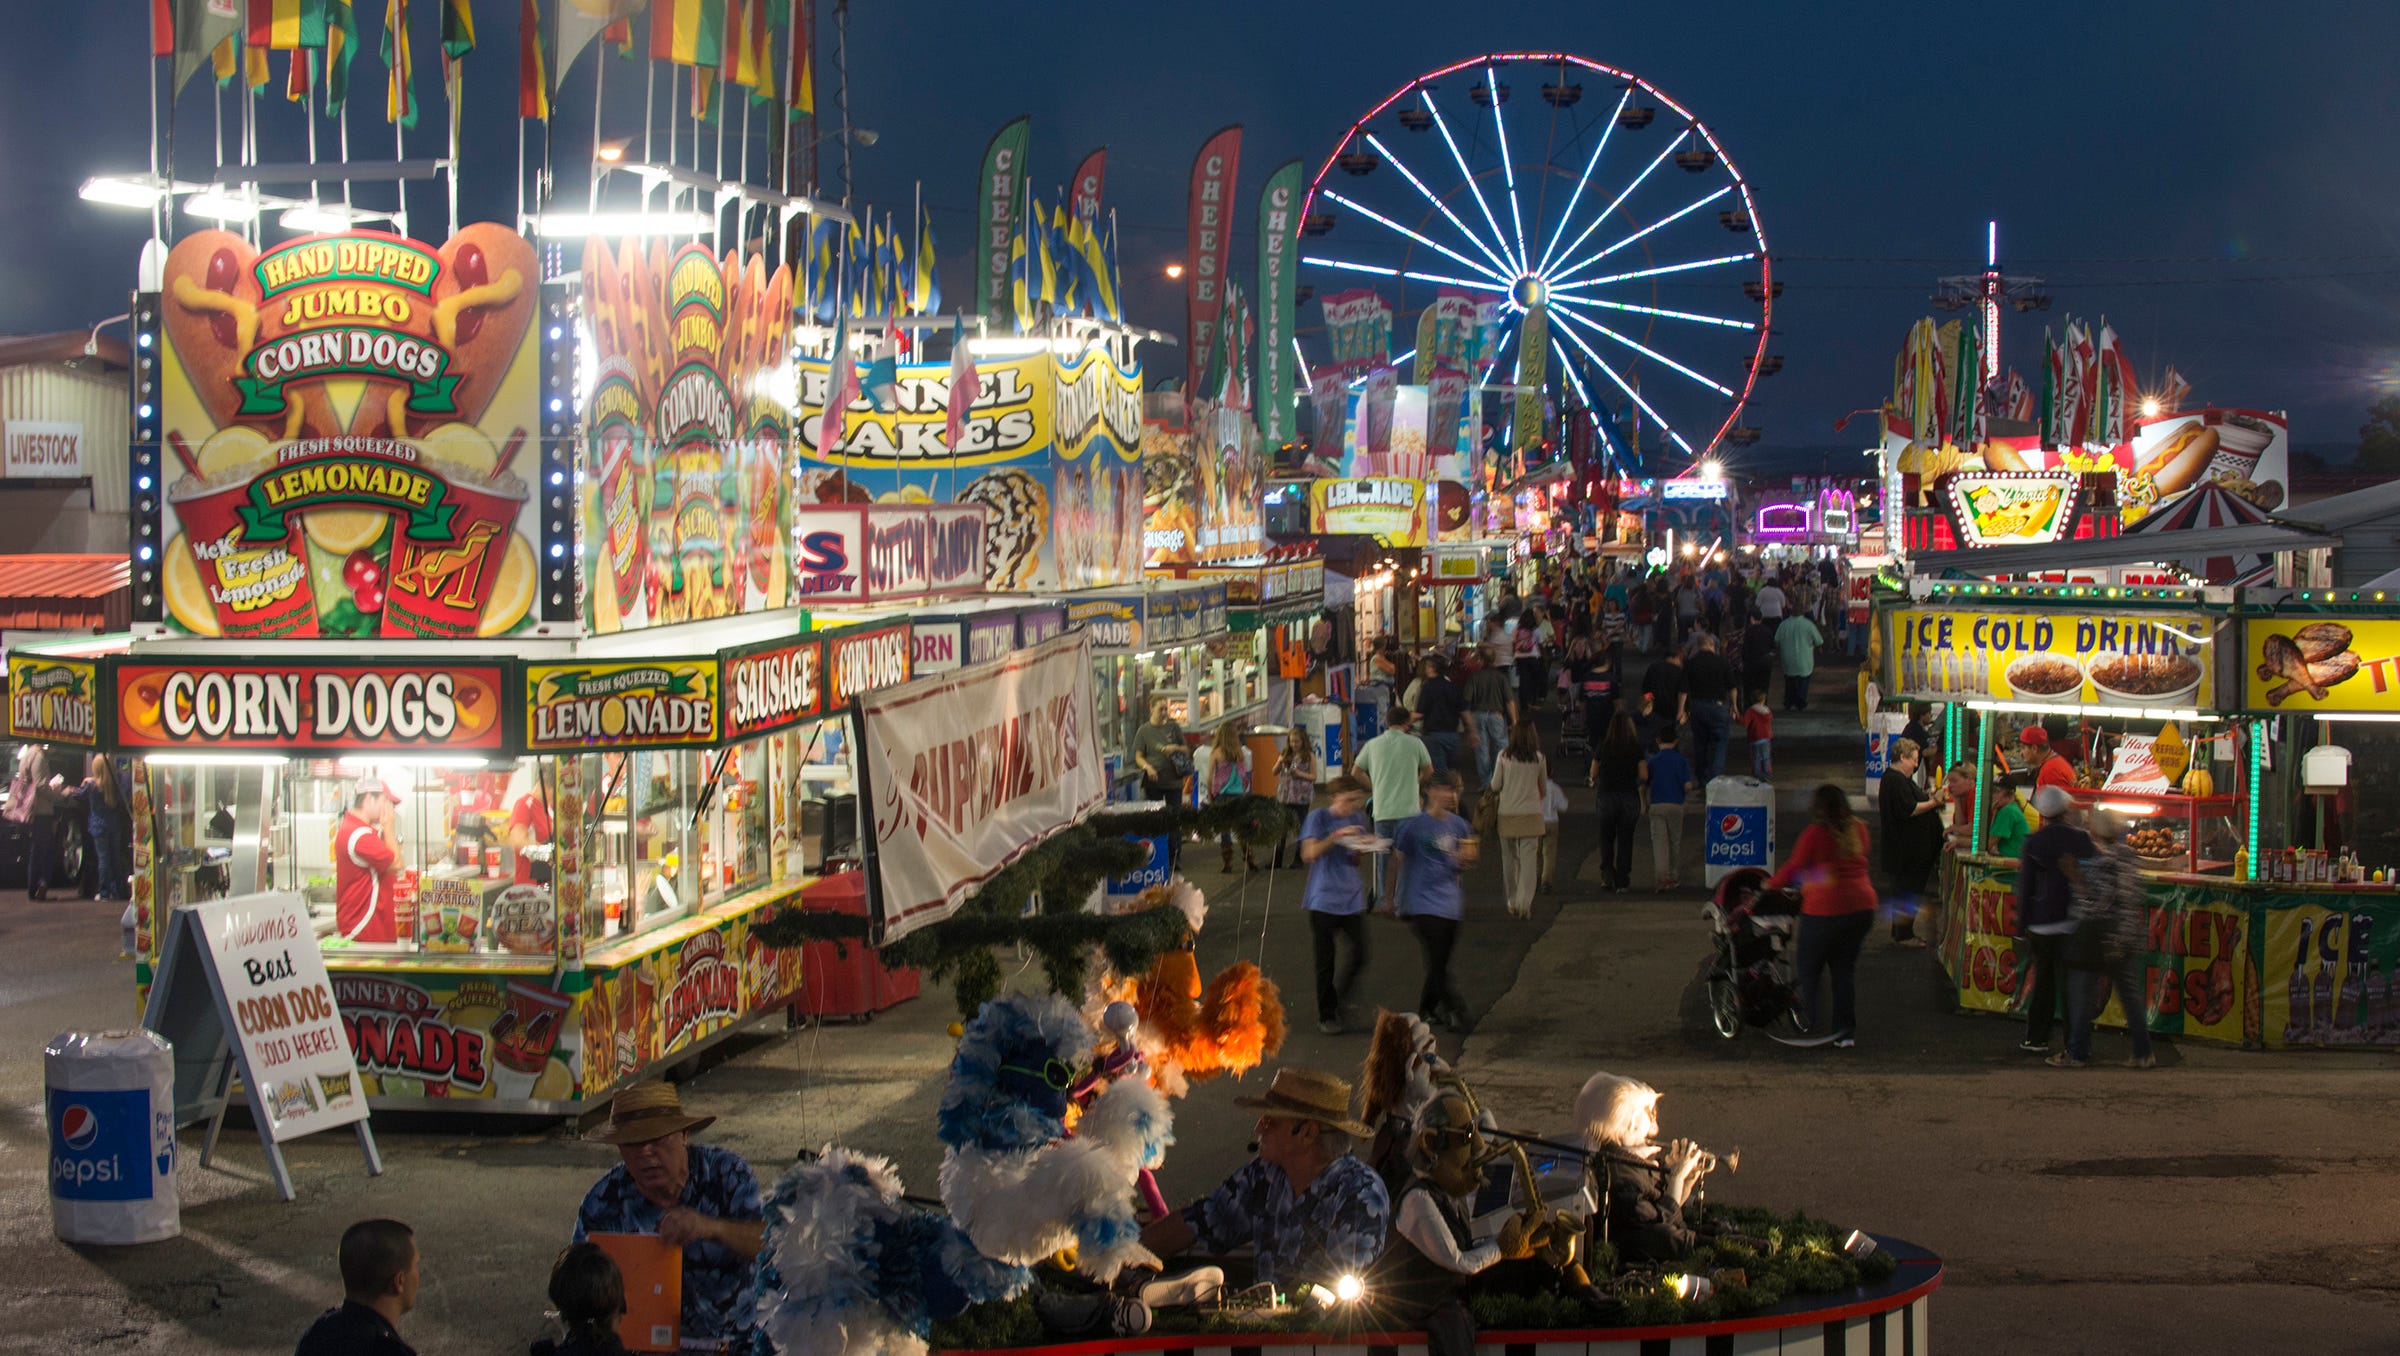 What's new at the Alabama National Fair